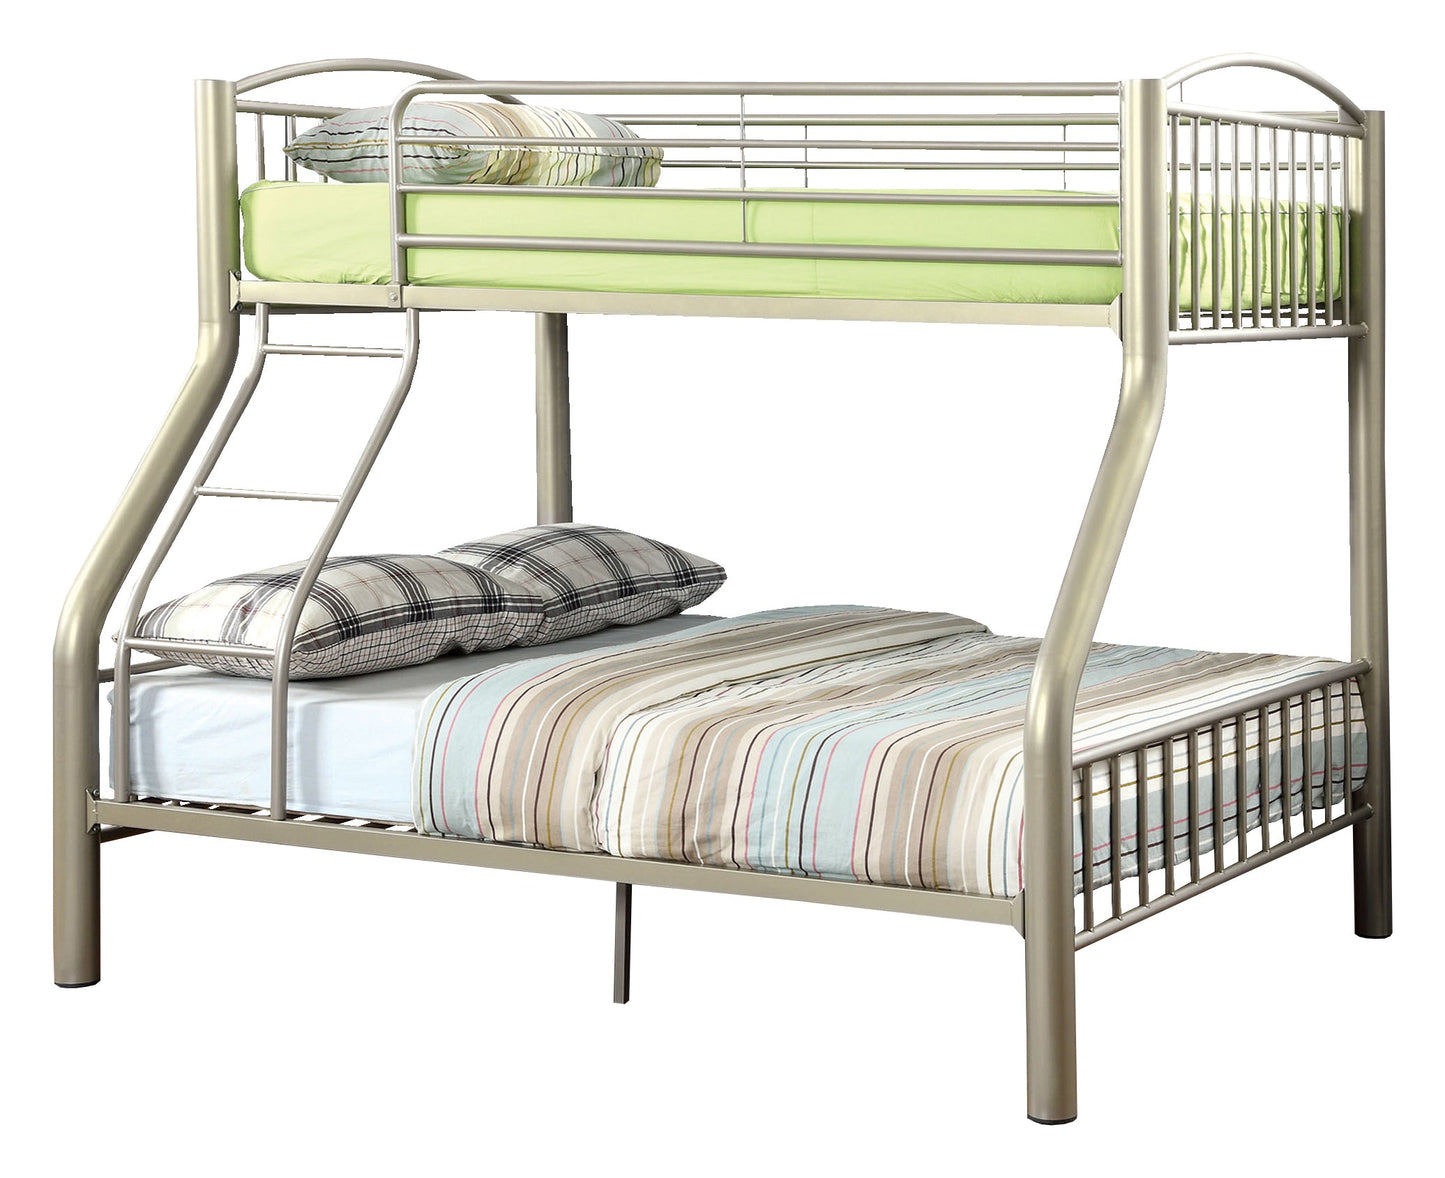 Pimmel Contemporary Metal Bunk Bed in Twin over Full